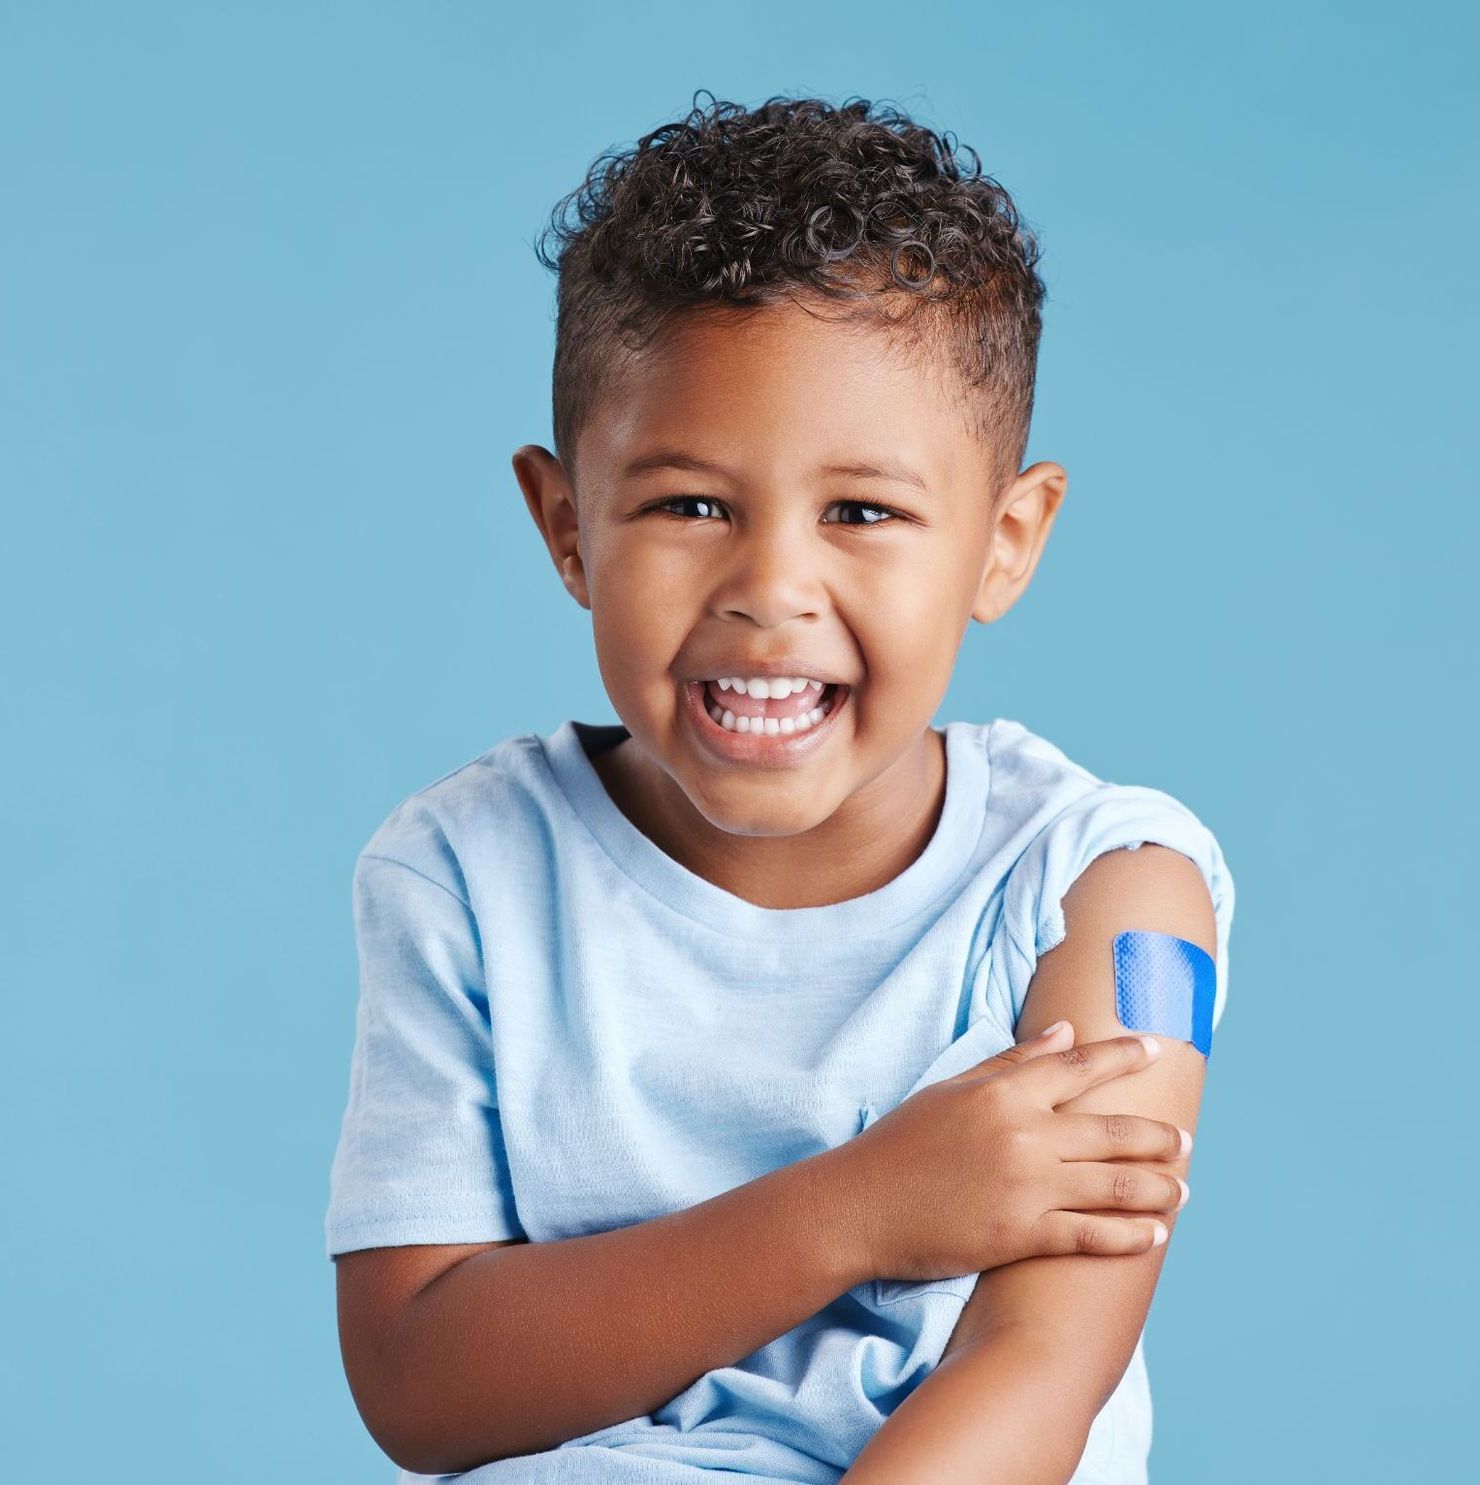 smiling young child showing band-aid on arm after vaccination